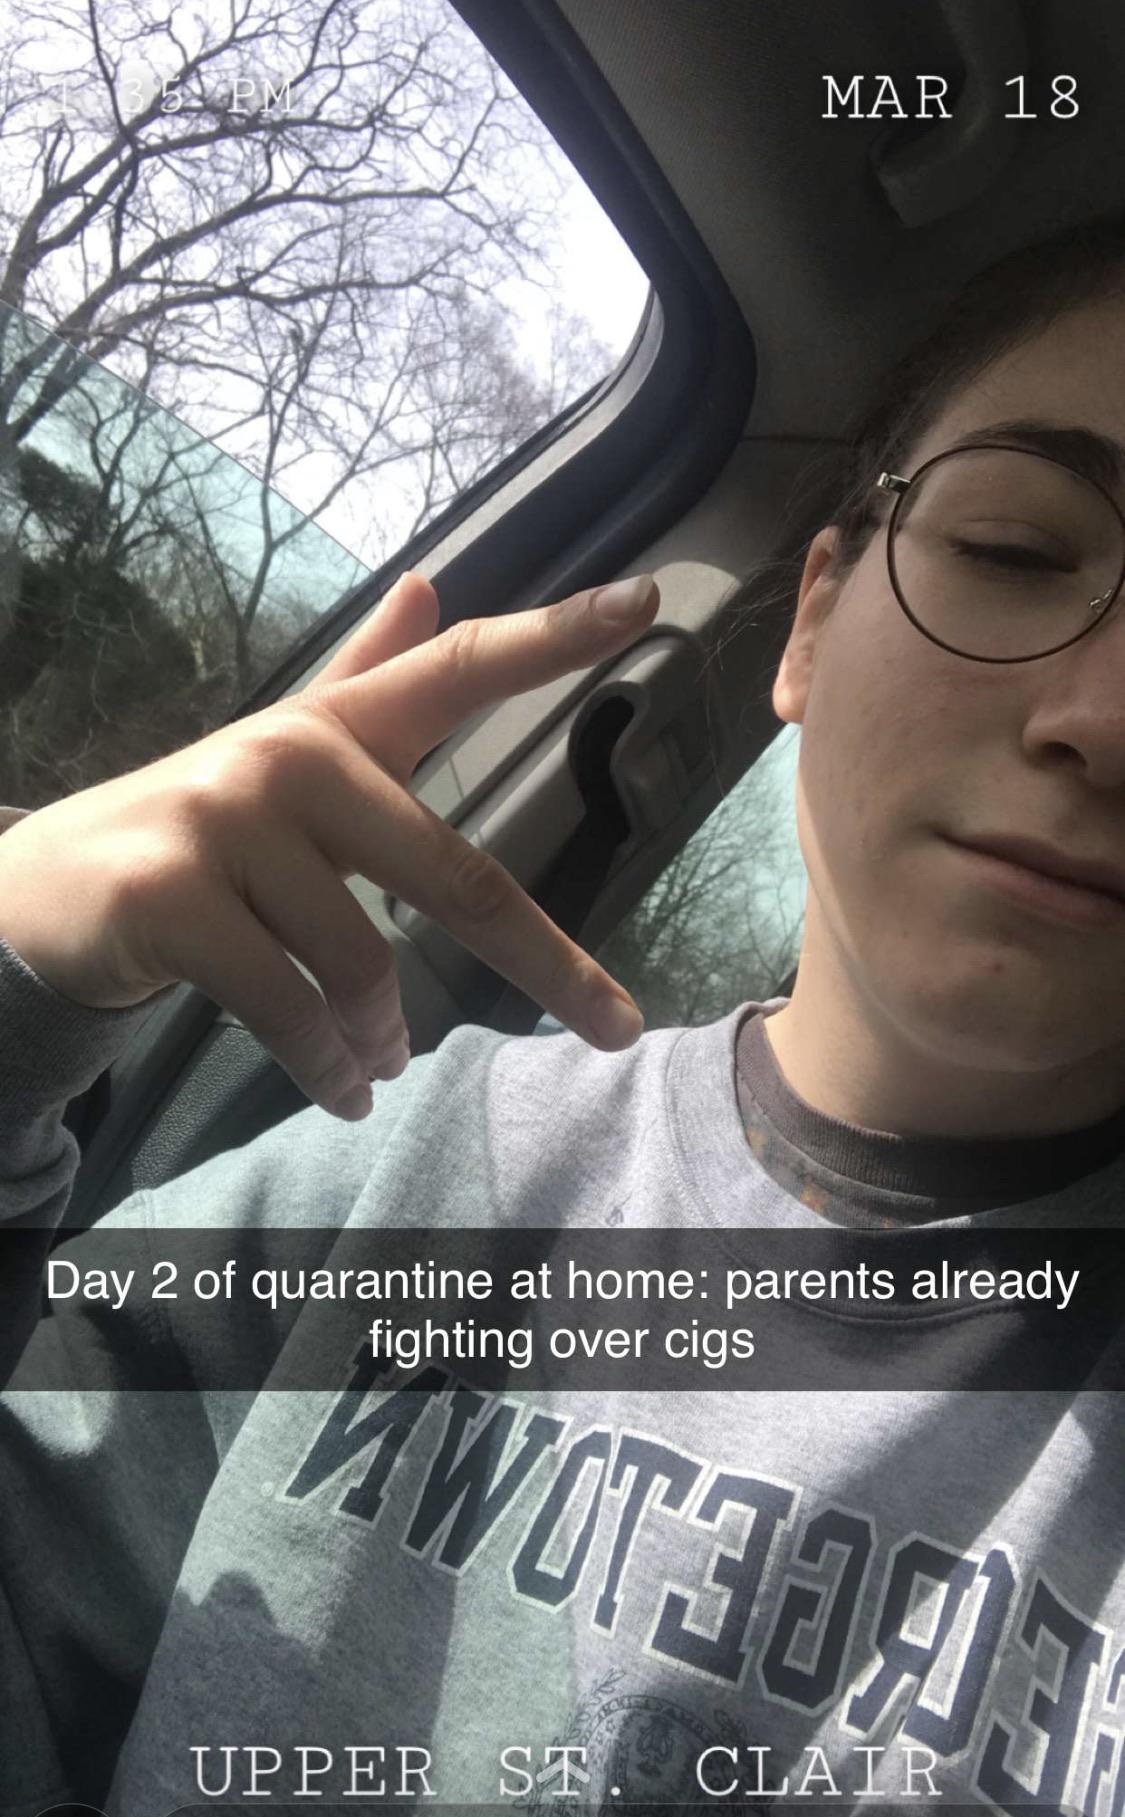 photo caption - Mar 18 Day 2 of quarantine at home parents already fighting over cigs Upper St. Clair